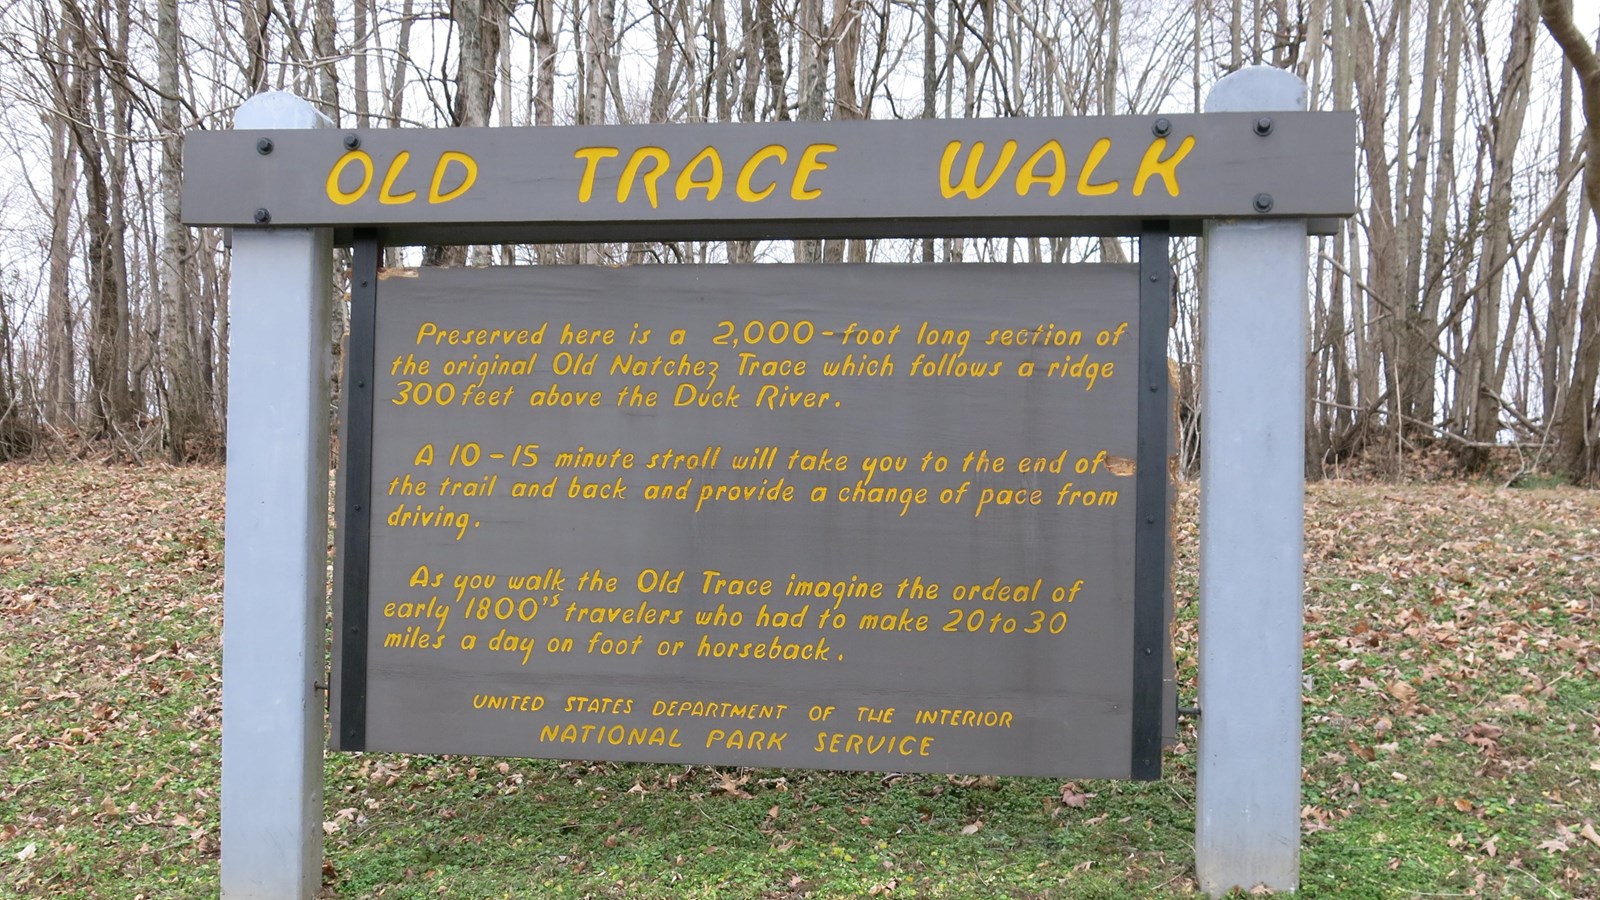 Wooden sign painted brown with yellow letters mentioning the short walk at that location